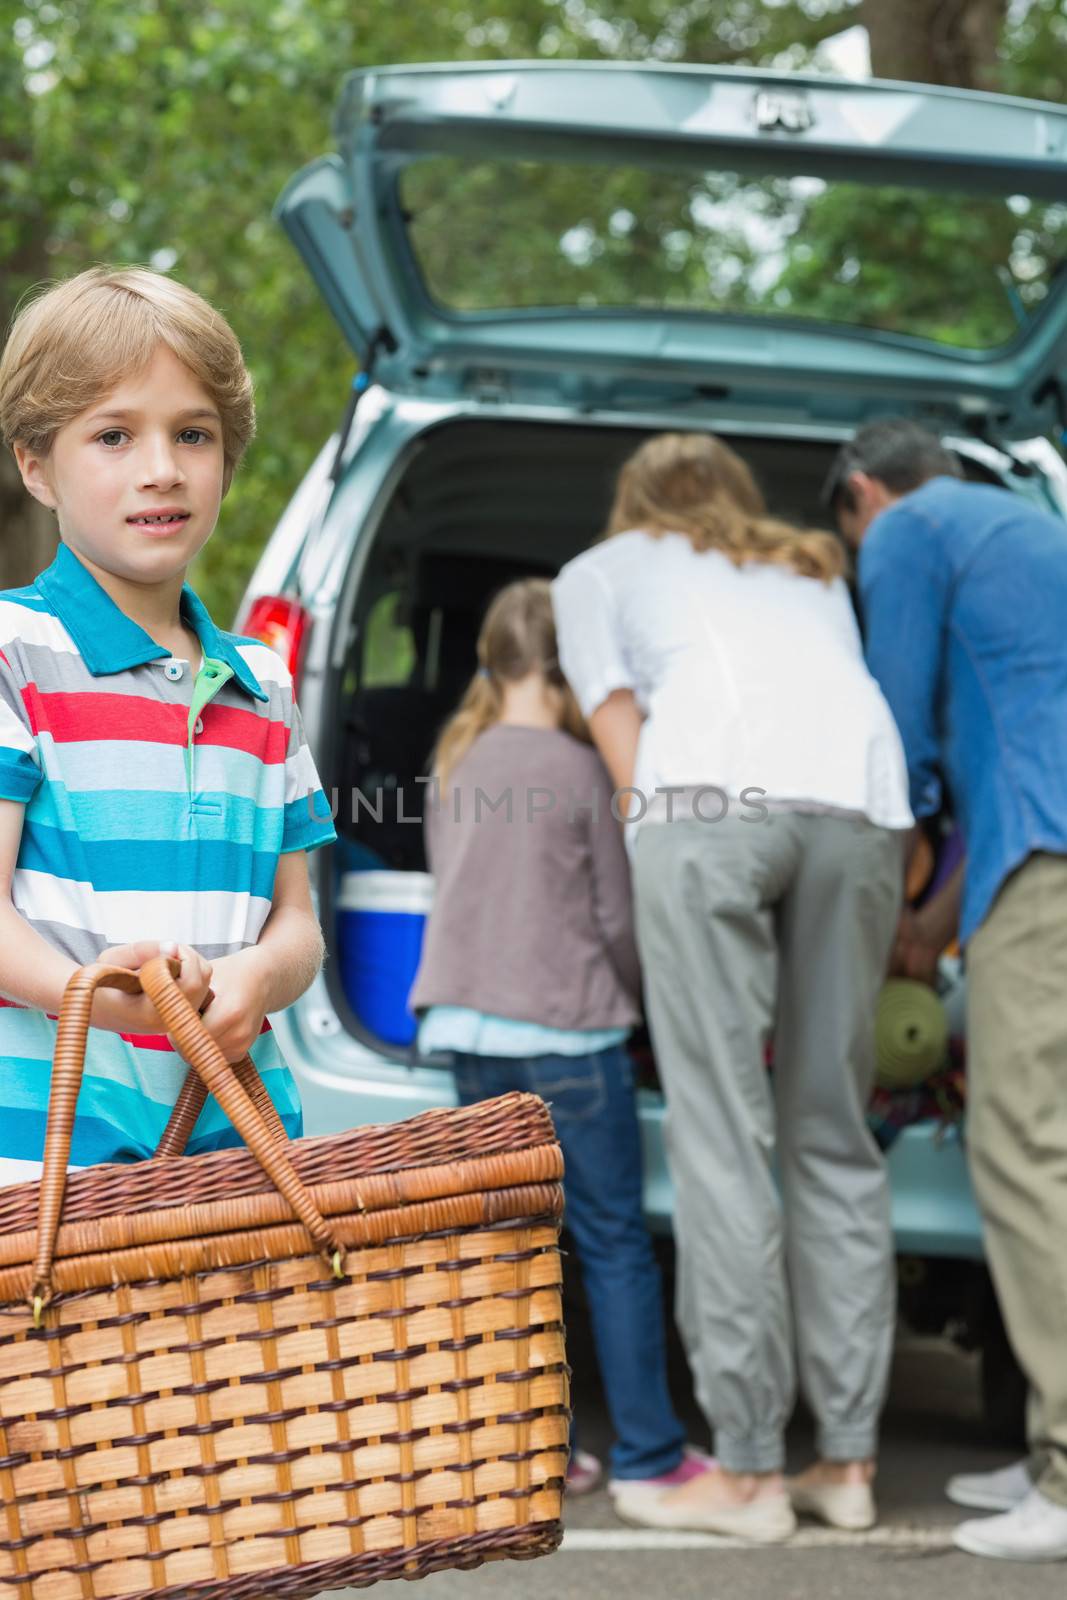 Boy with picnic basket while family in background at car trunk by Wavebreakmedia